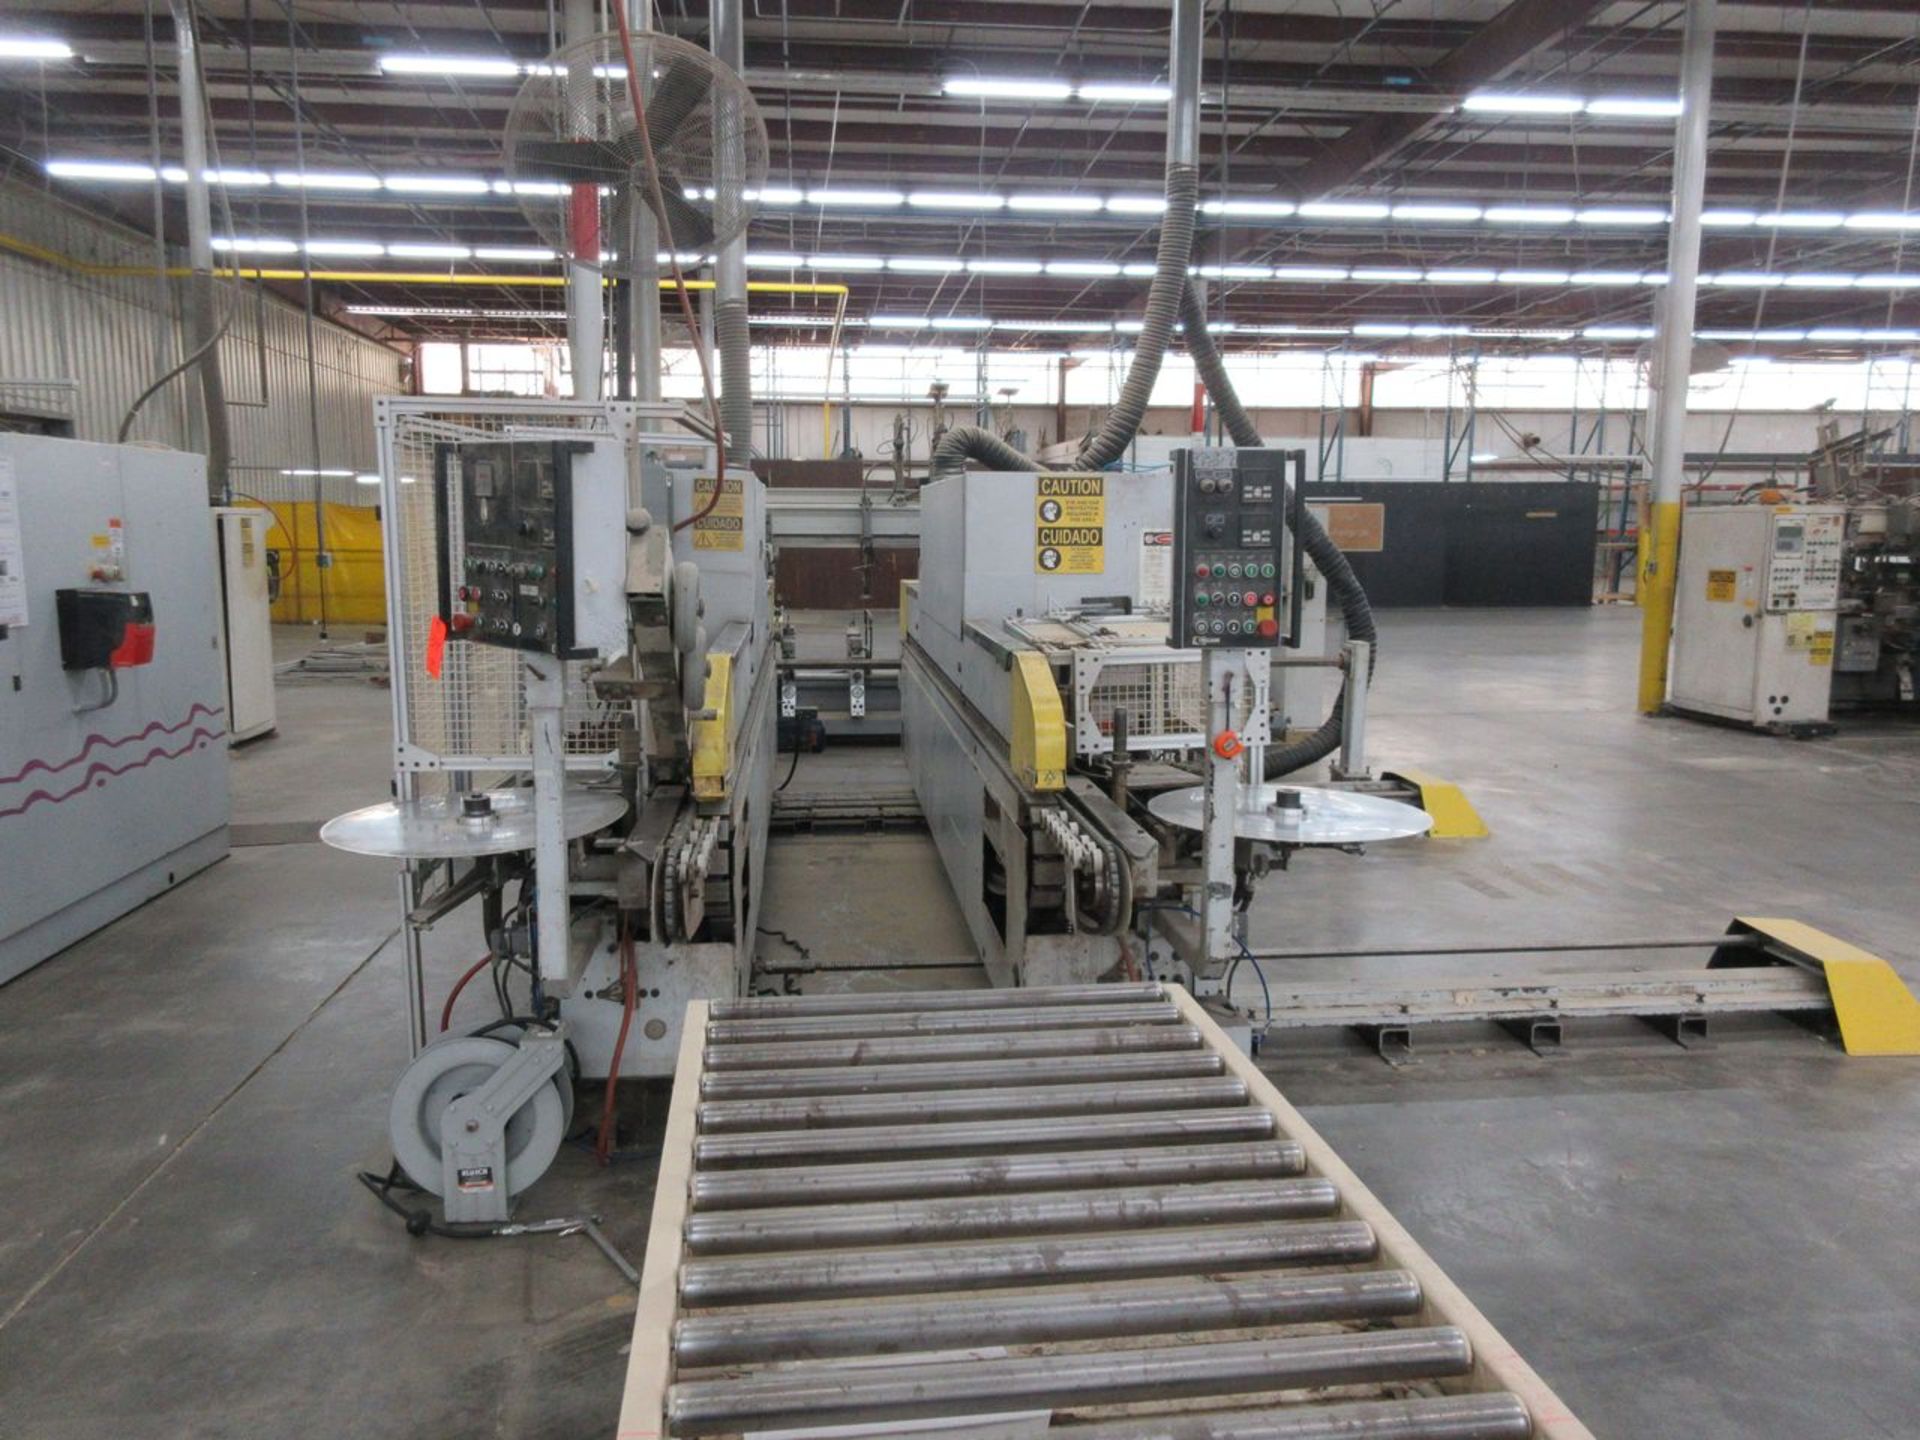 Homag Type KL84/A12/30 Double End Edge Bander, S/N: 0-200-08-3019 (1998); with Coil Feed Reel, - Image 4 of 26